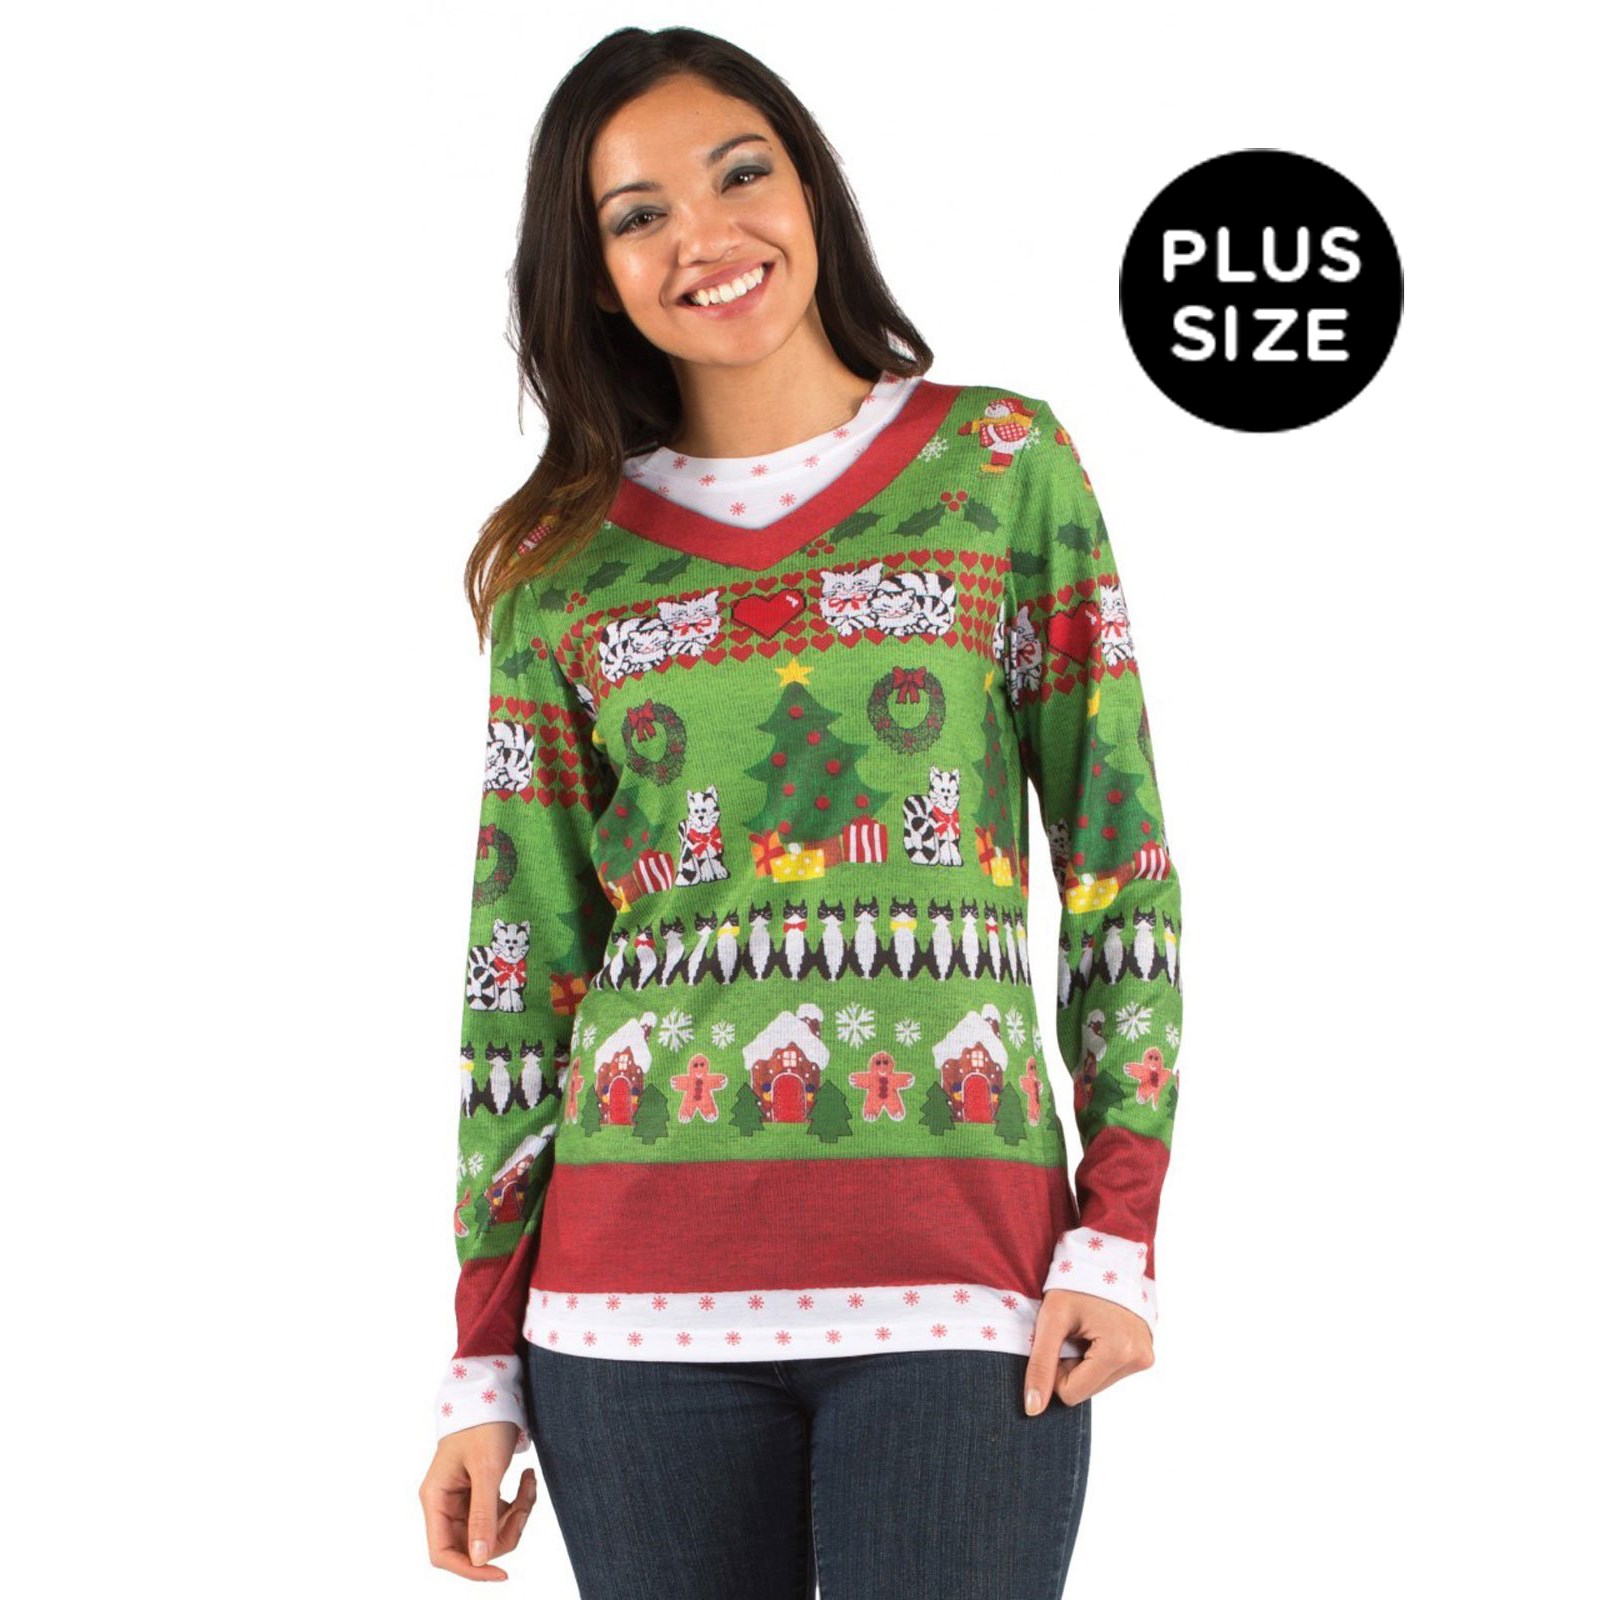 Plus Size Ugly Christmas Sweater With Cats For Women